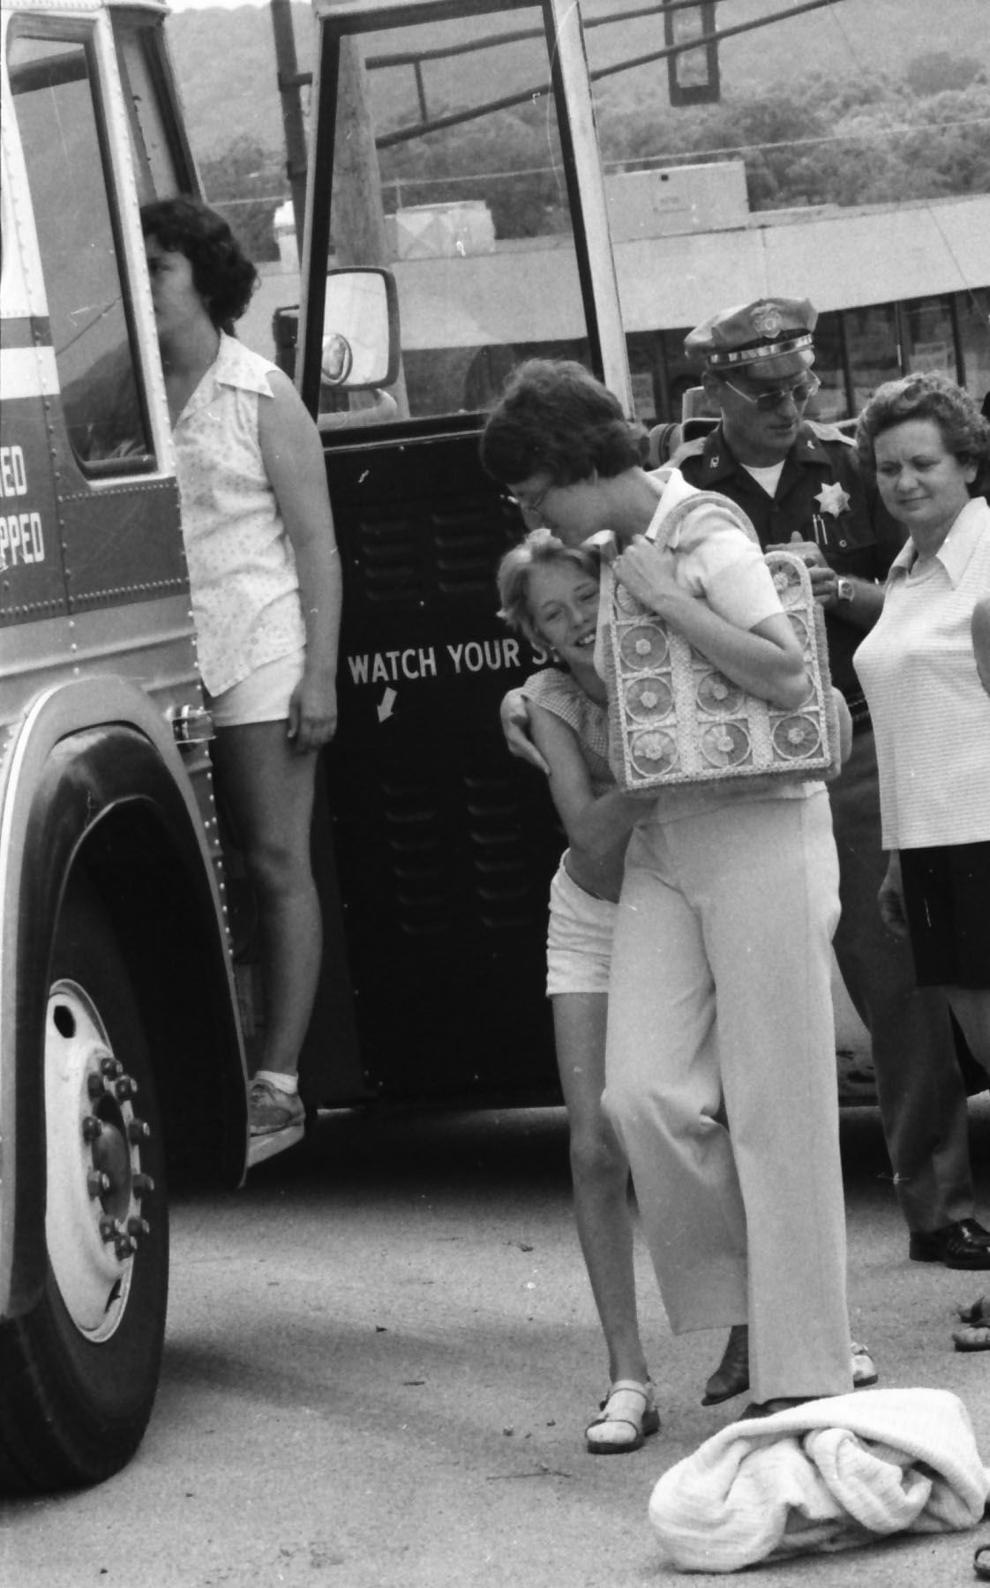 43 Years Ago The Murders Of Three Girl Scouts In Oklahoma Stunned The Nation Created 